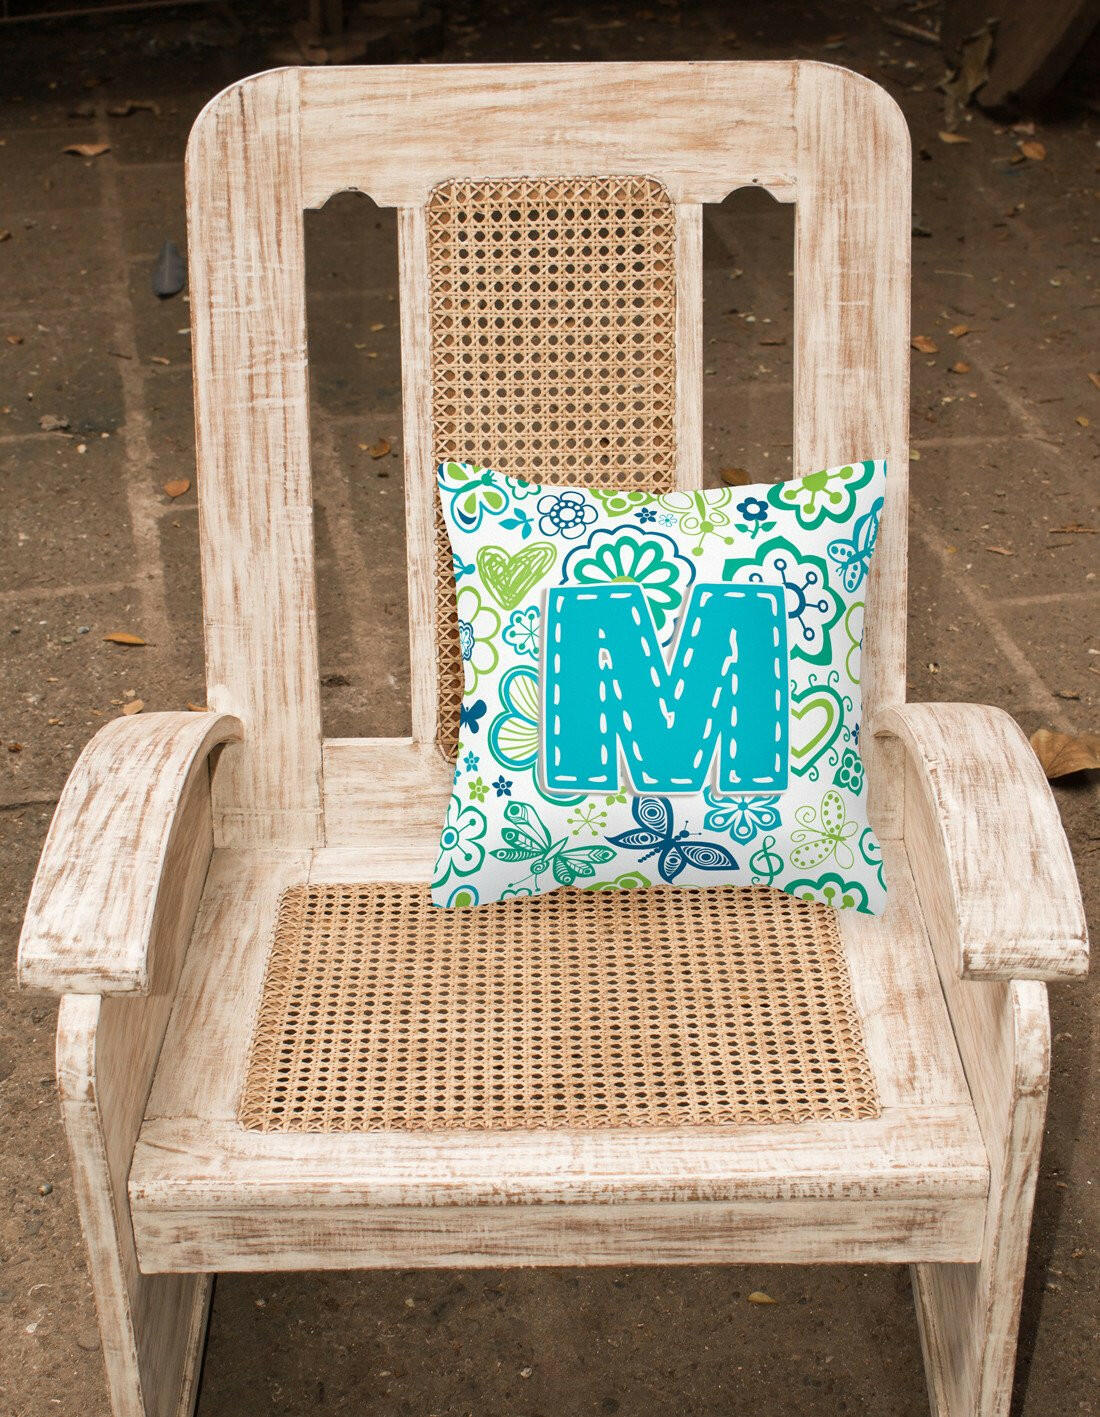 Letter M Flowers and Butterflies Teal Blue Canvas Fabric Decorative Pillow CJ2006-MPW1414 by Caroline's Treasures